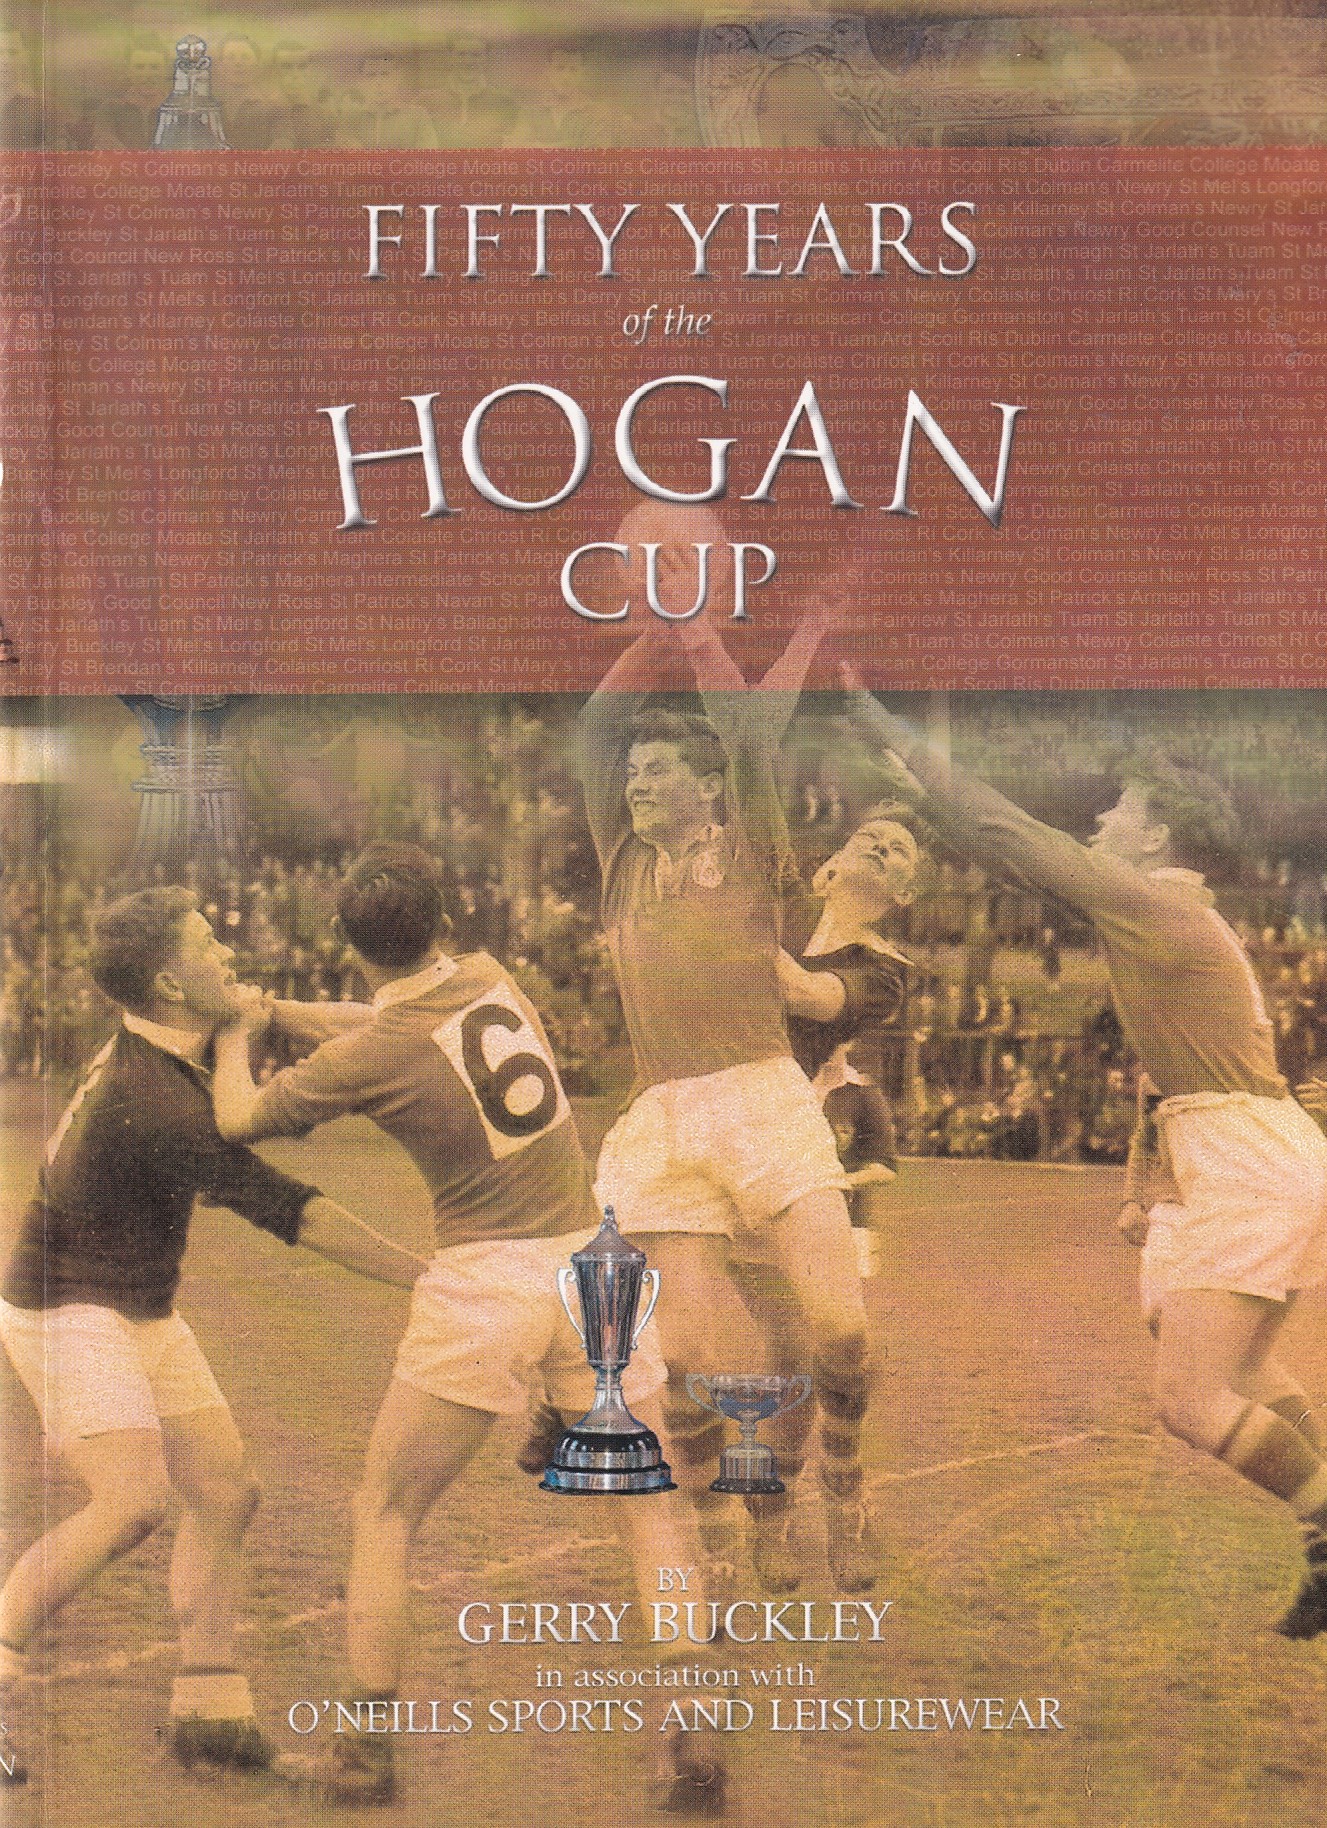 Fifty Years of Hogan Cup | Buckley, Gerry | Charlie Byrne's